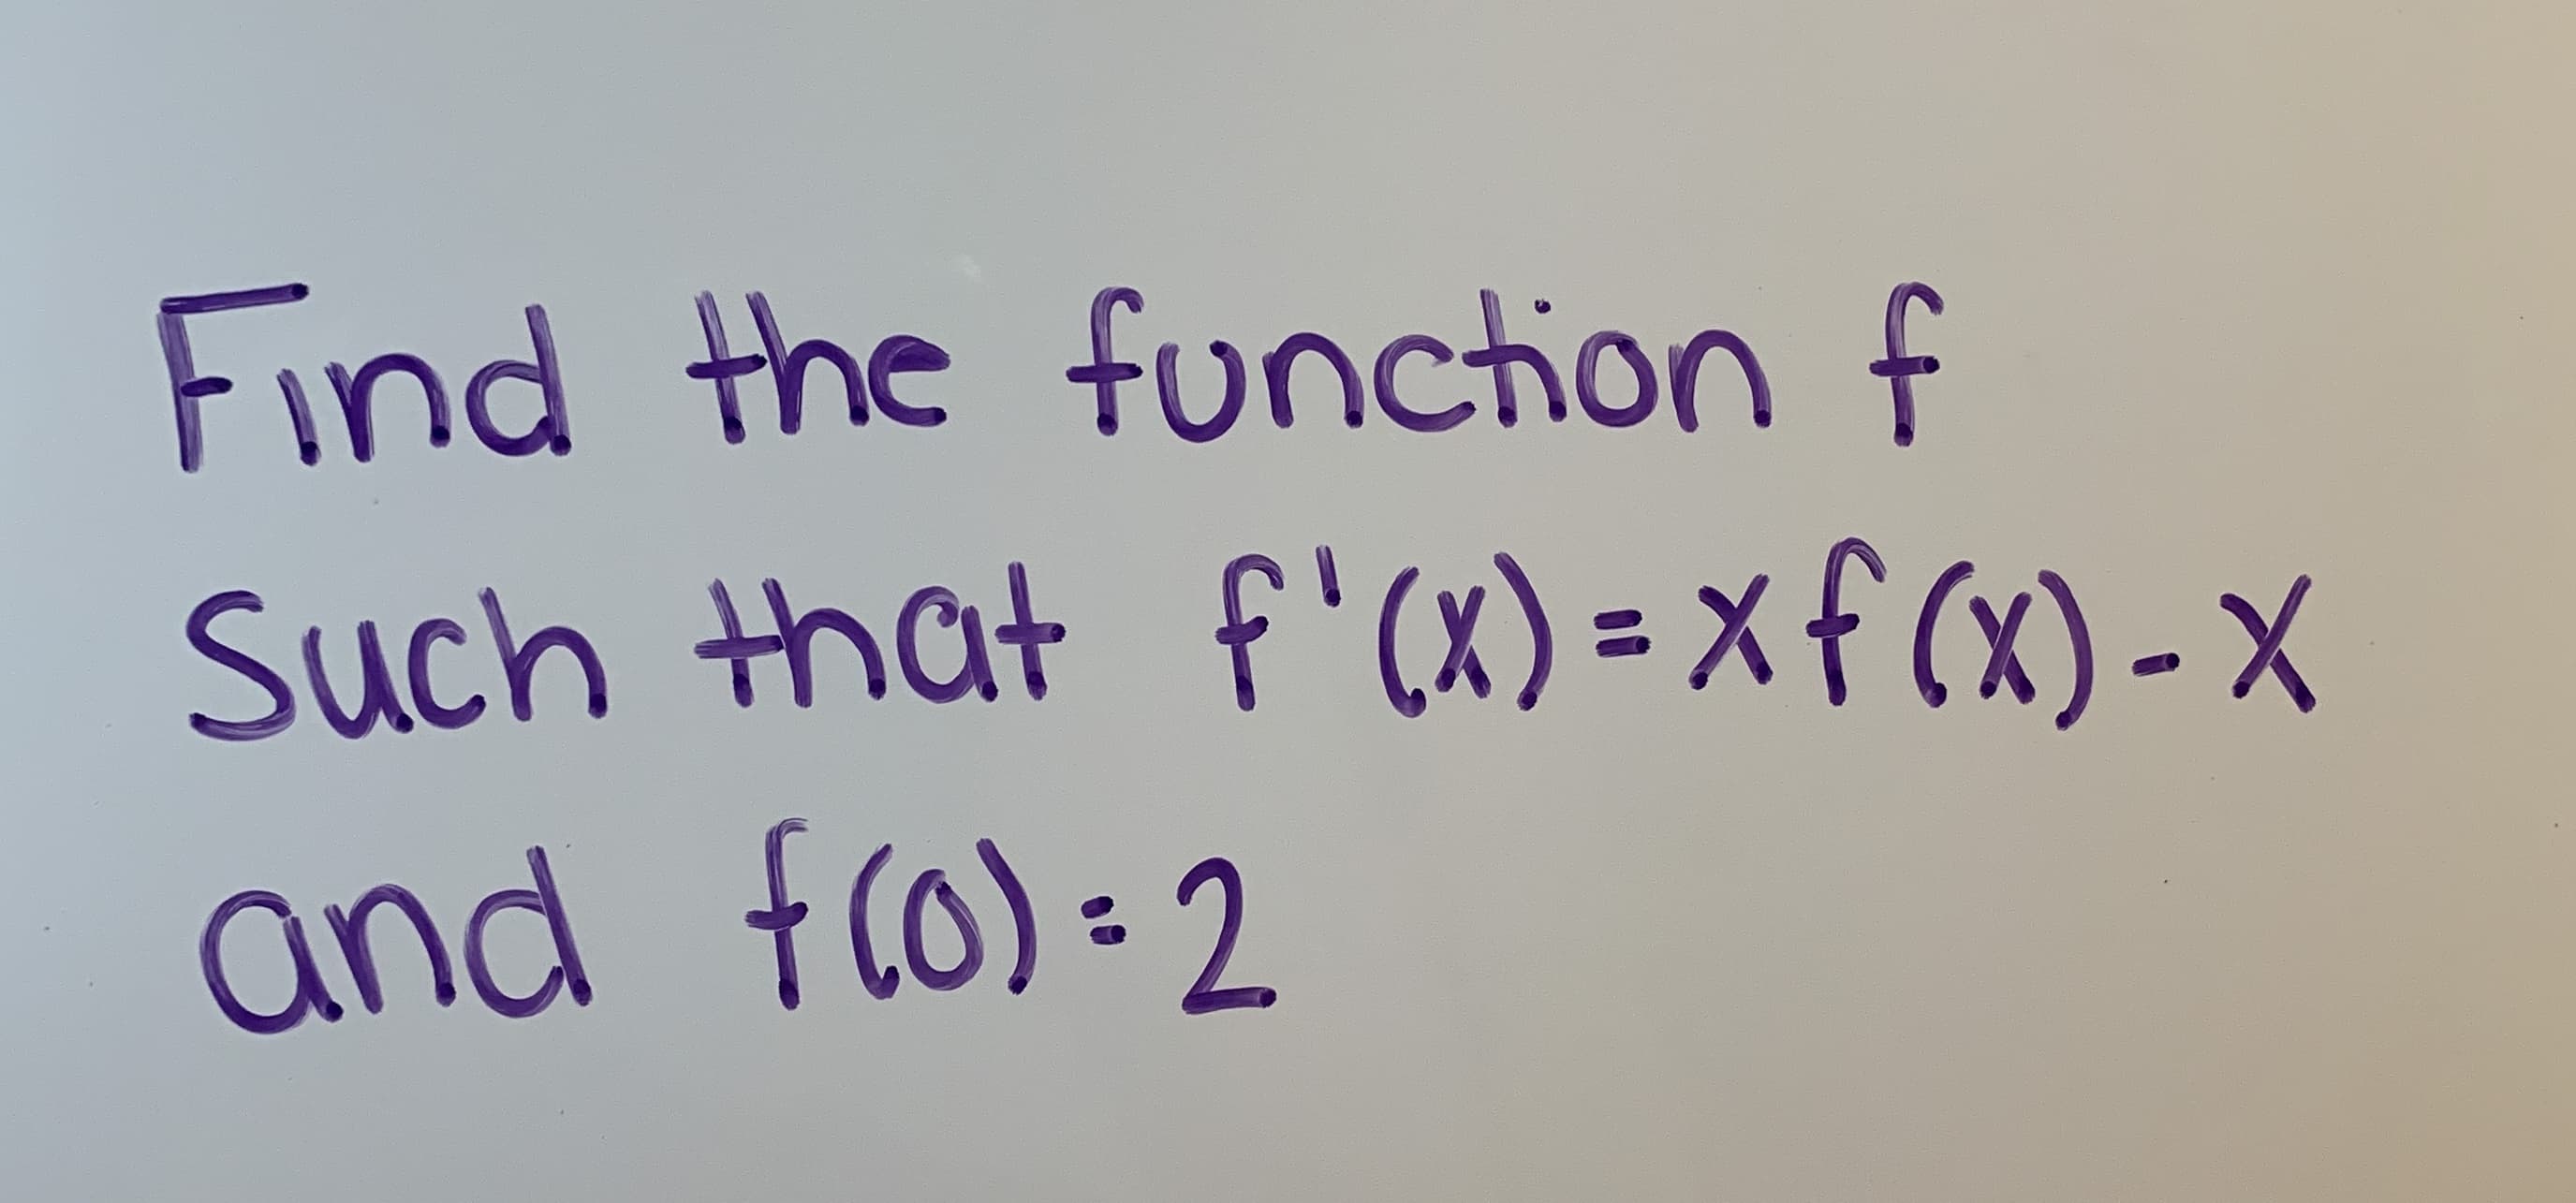 Find the funchion f
Such that F(x) xf (x)-x
and fo) 2
